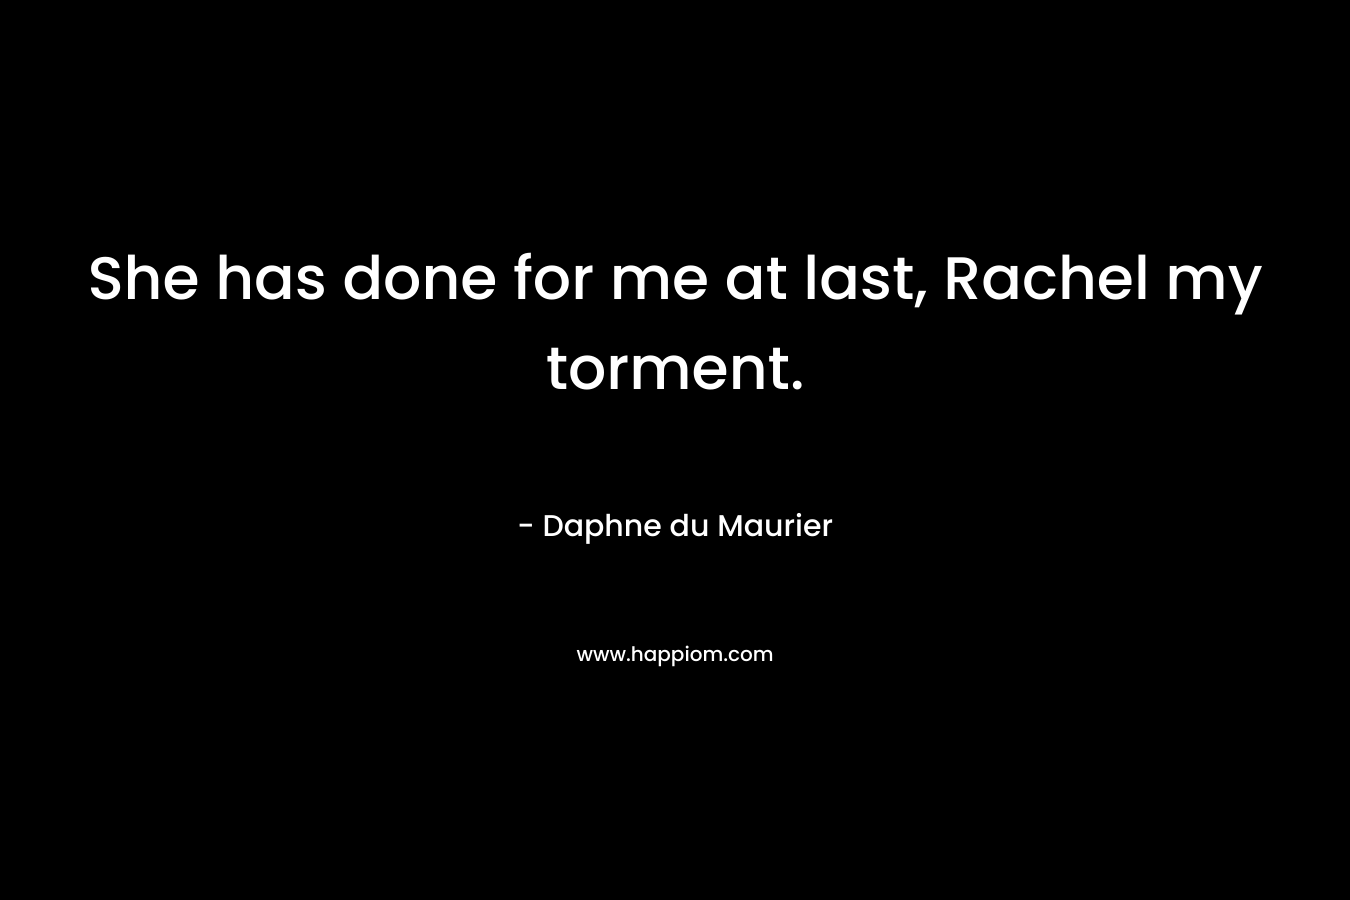 She has done for me at last, Rachel my torment. – Daphne du Maurier